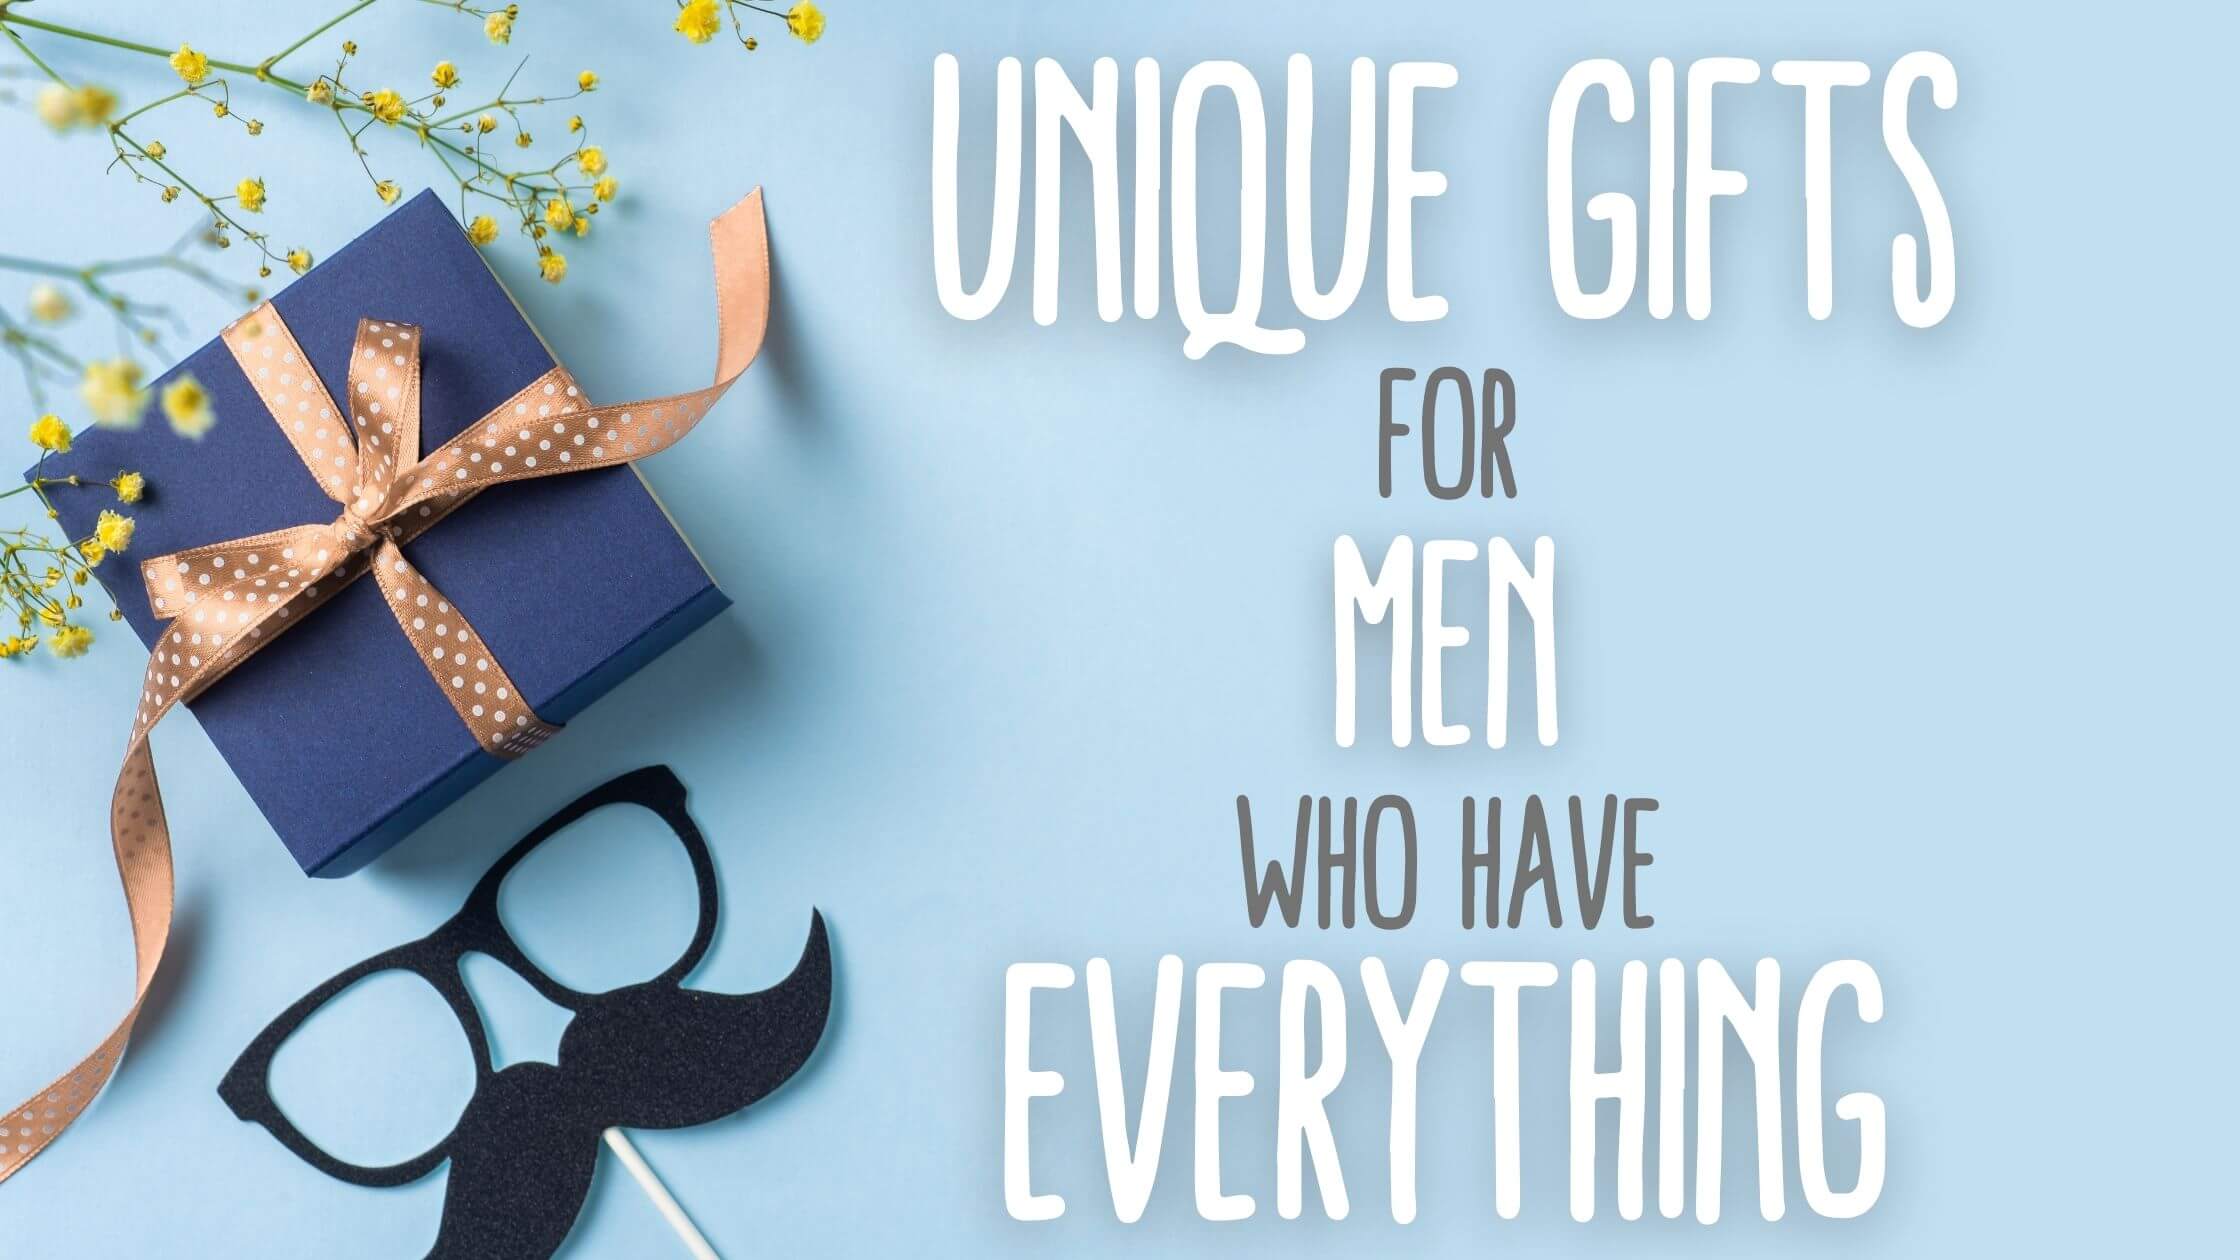 26 Unusual Luxury Gifts For Men (You Got To See #23) - This Gifts for Men